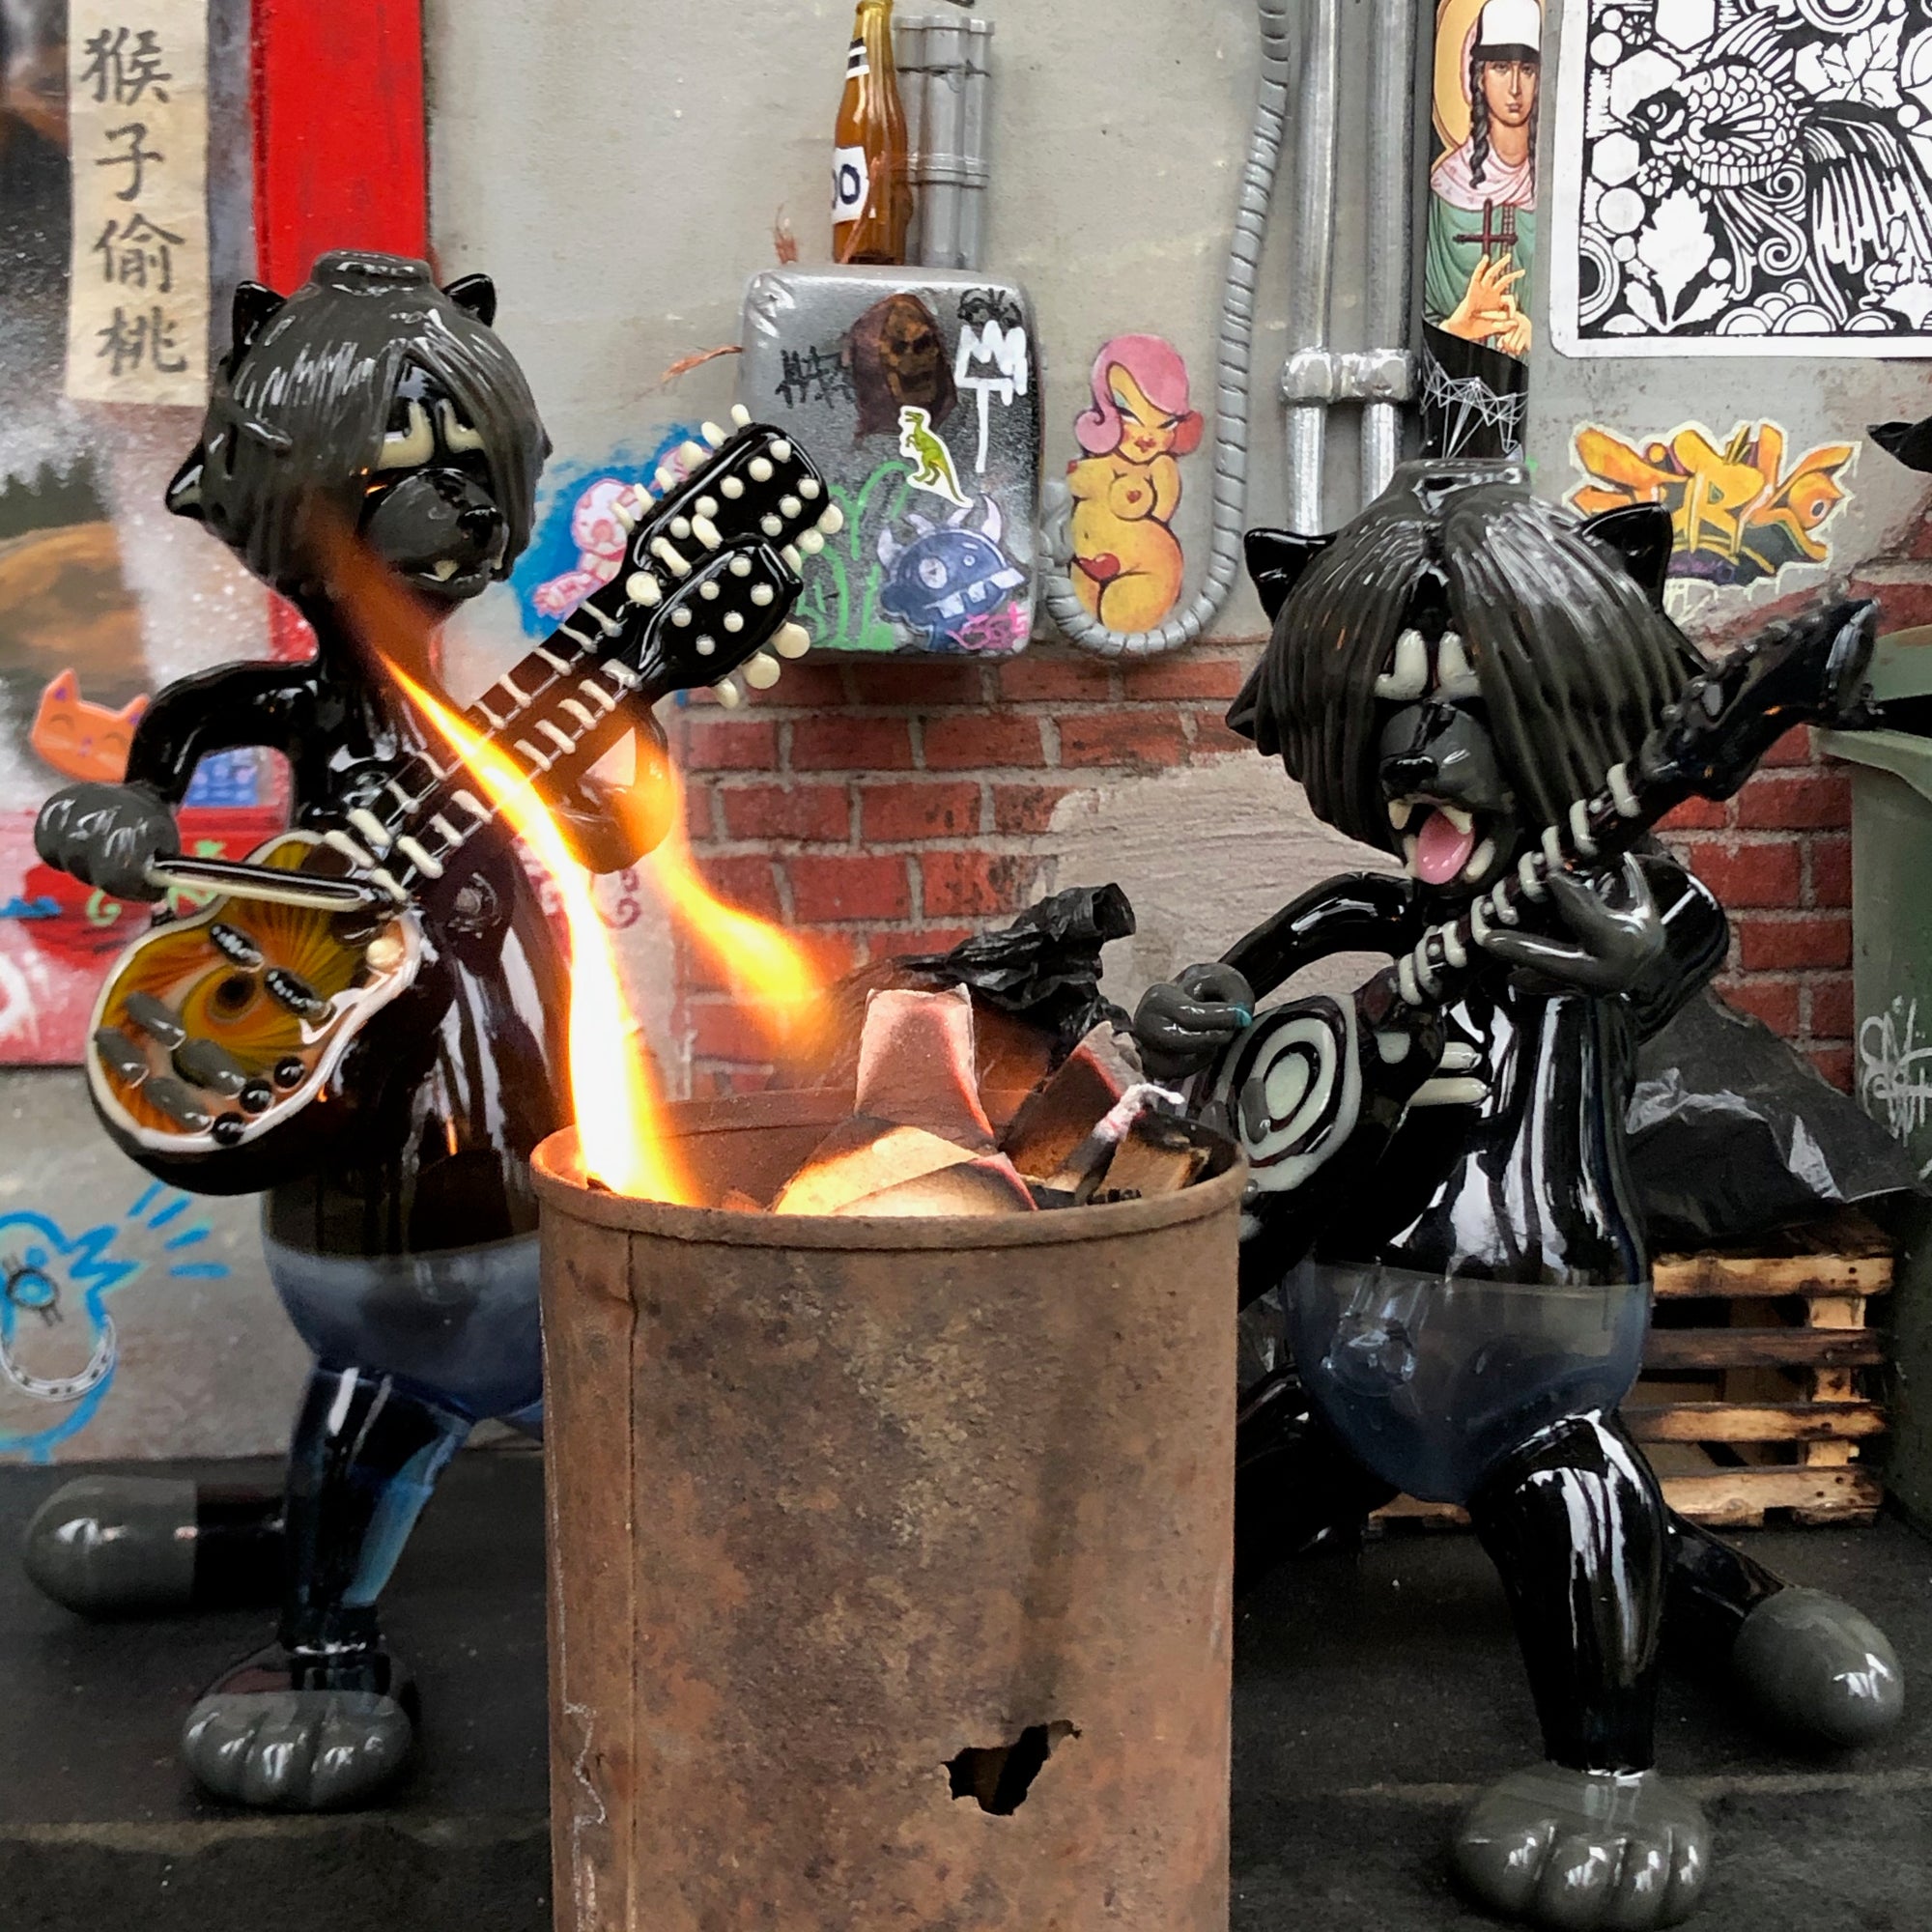 Racoon Death Metal band is shown among R3G15 Miniature alley scene, there is real fire in the model trash can in front of the musicians.